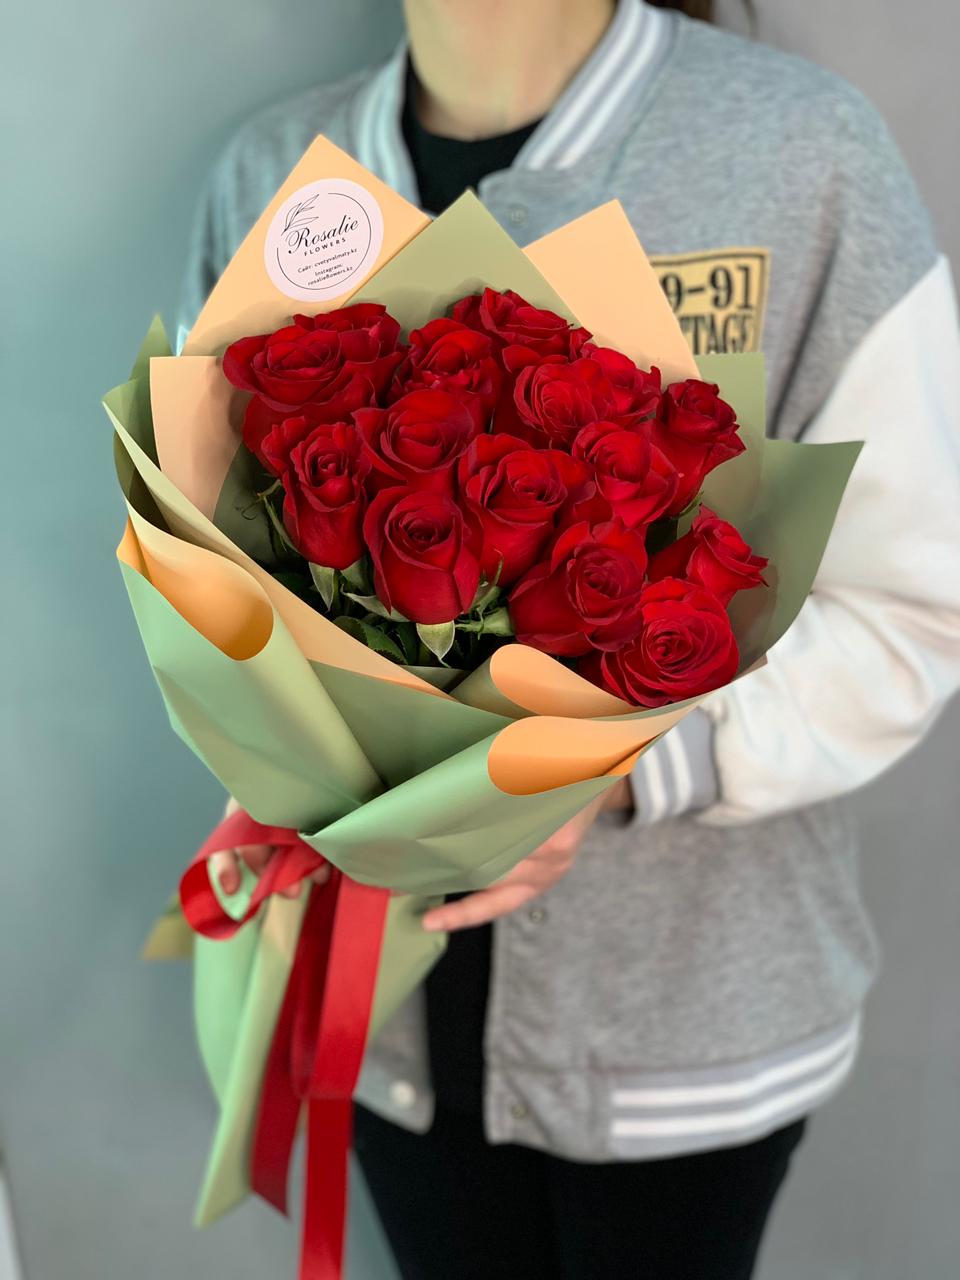 Bouquet of 15 red roses in decoration flowers delivered to Almaty